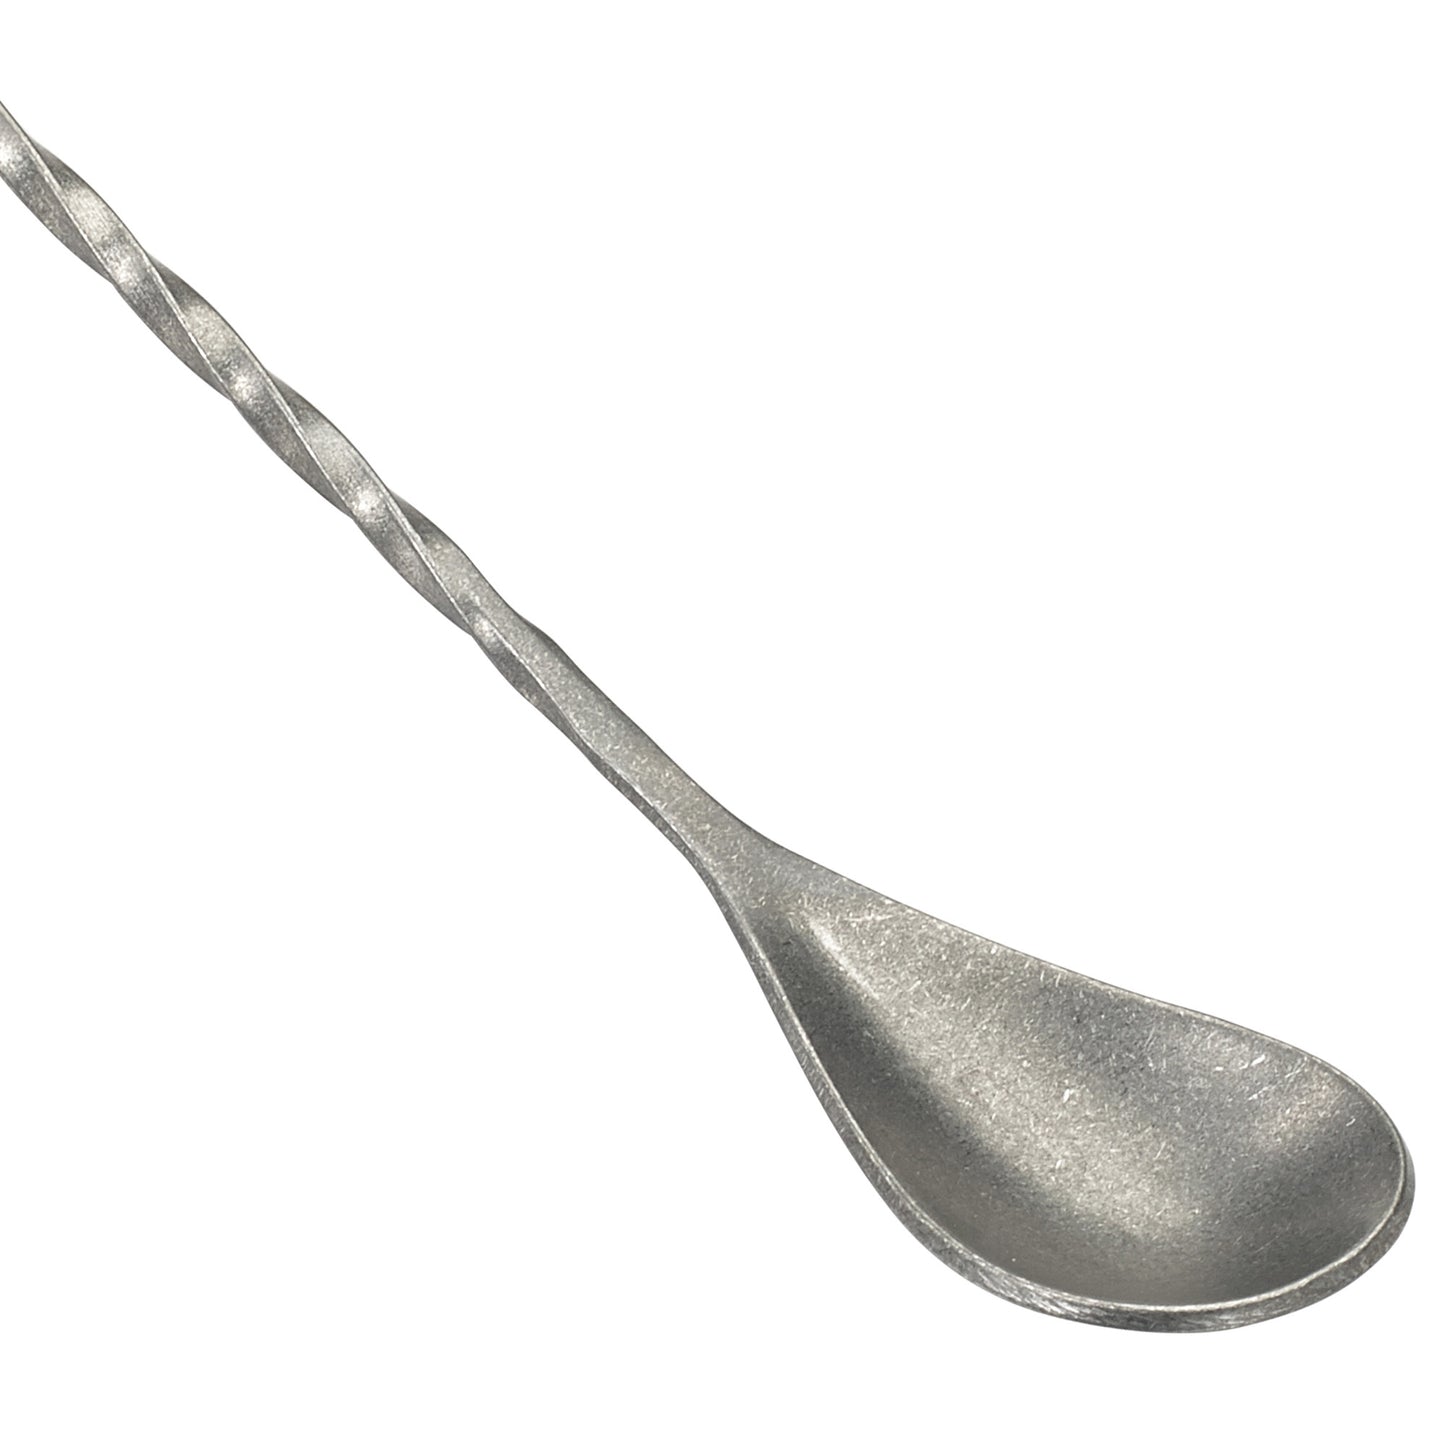 BABS-12CS - After5 Bar Spoon, Crafted Steel